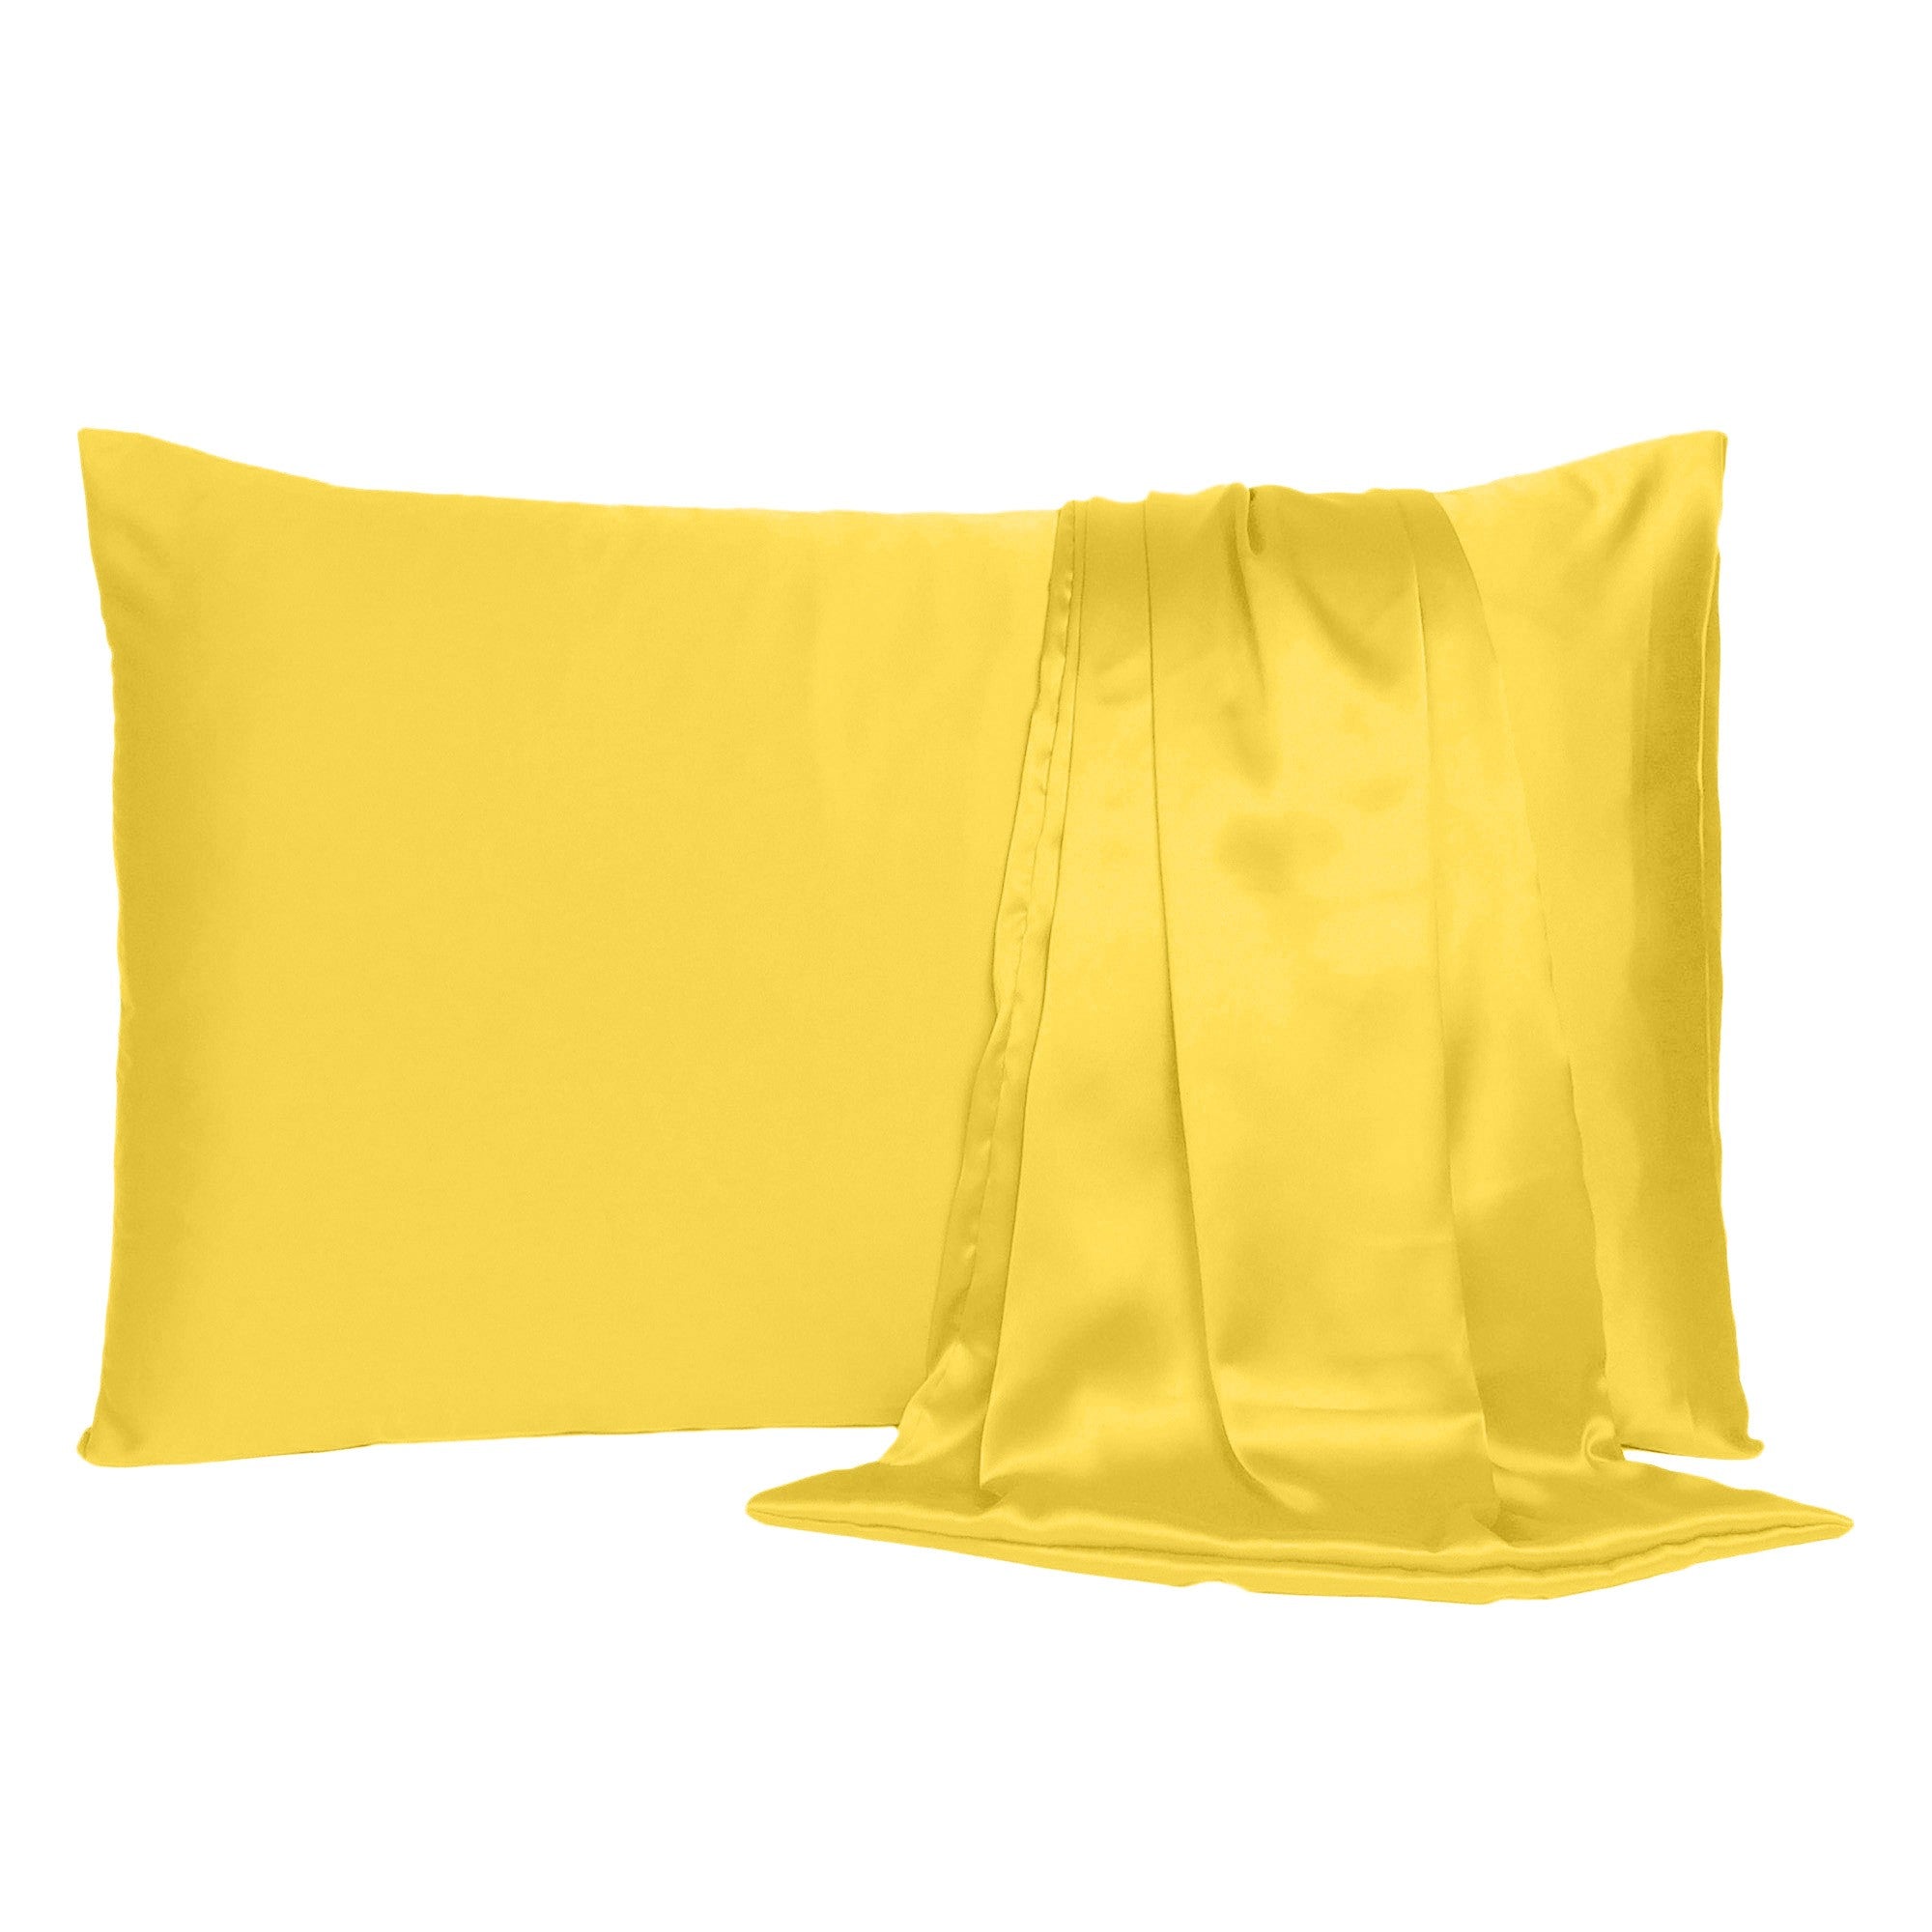 Lemon Dreamy Set Of 2 Silky Satin Queen Pillowcases - Tuesday Morning-Bed Sheets